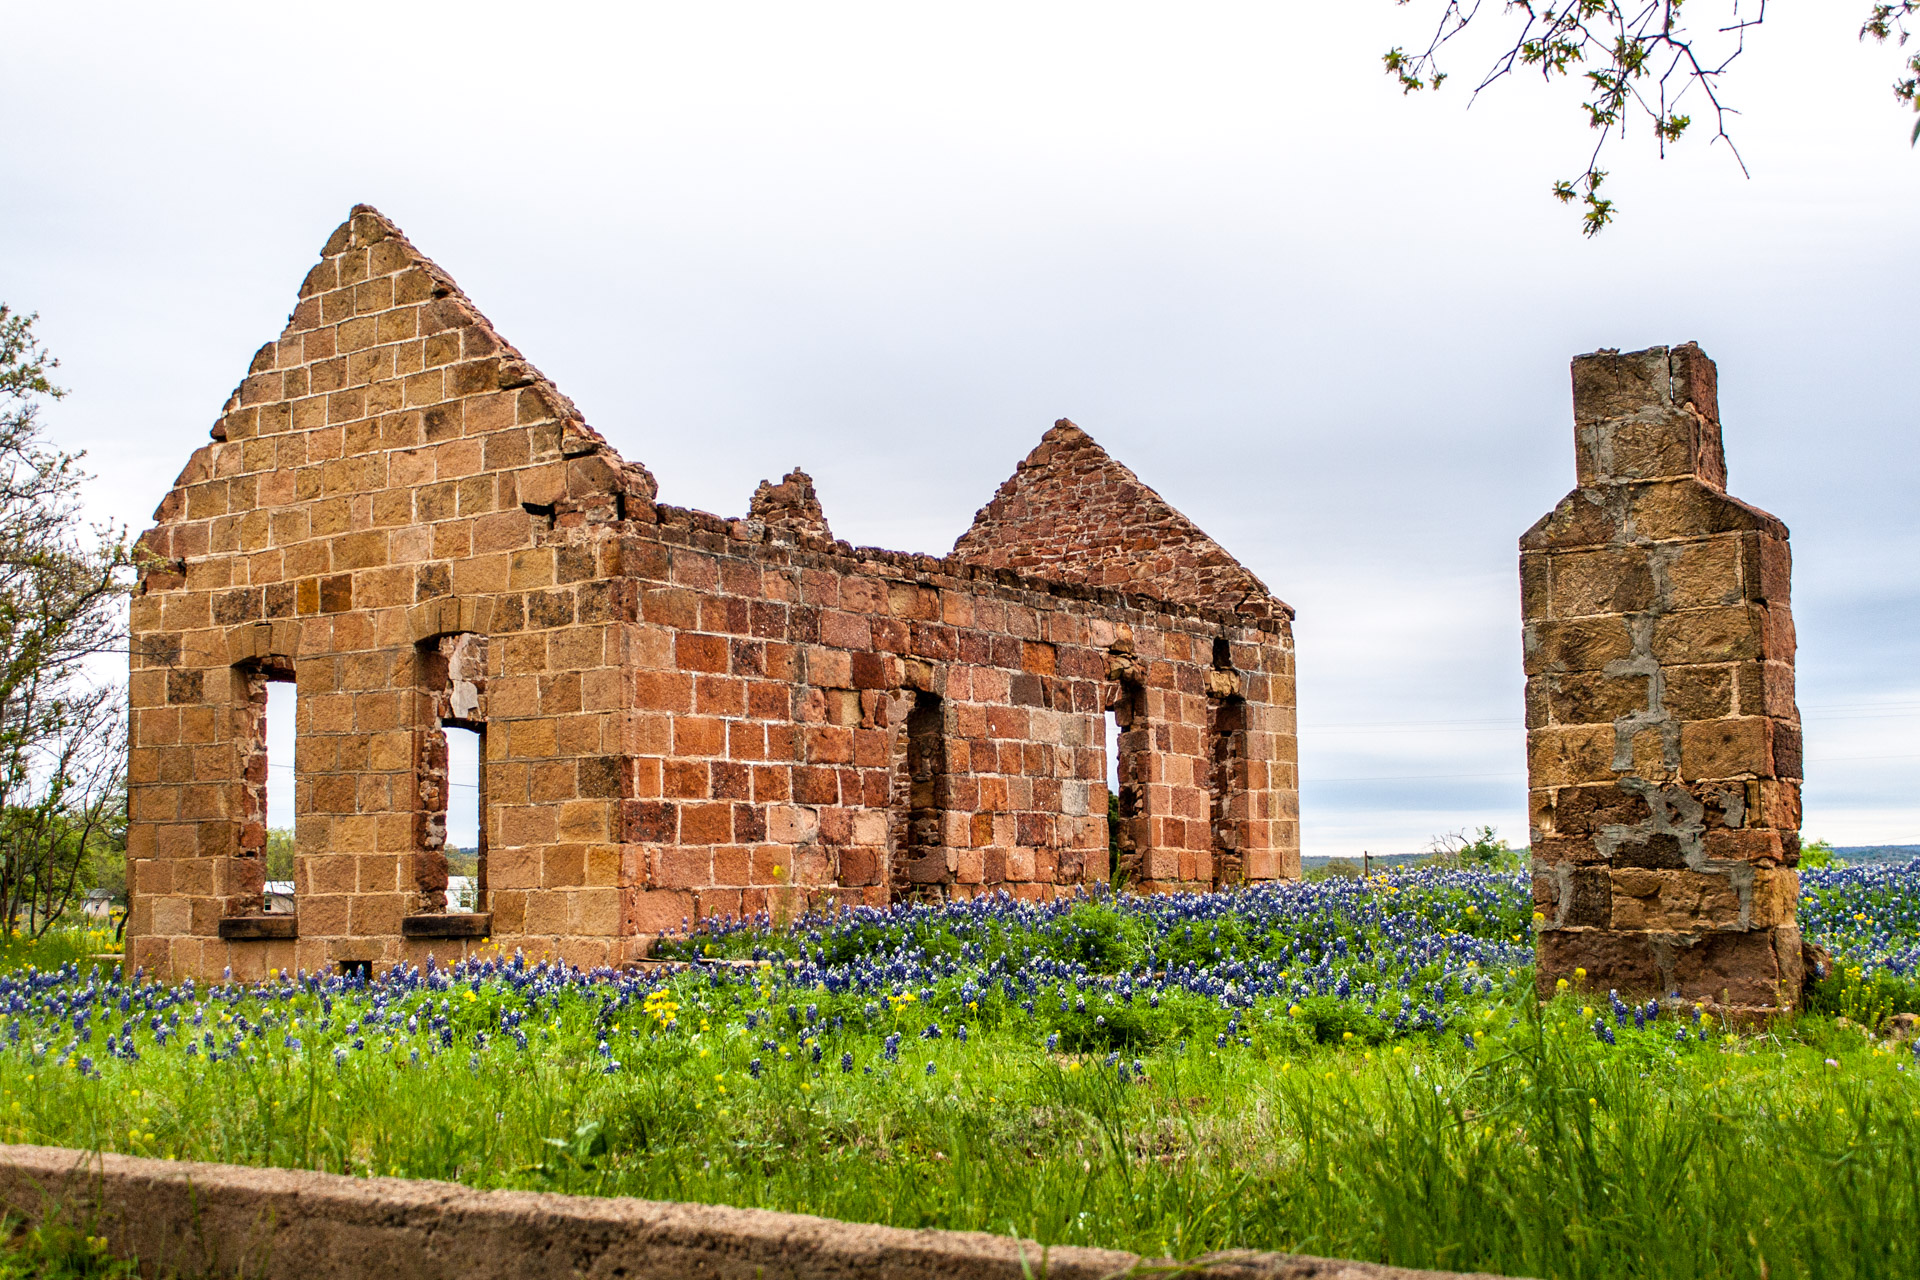 Pontotoc, Texas - A Stone Ruin With Bluebonnets (angle right)